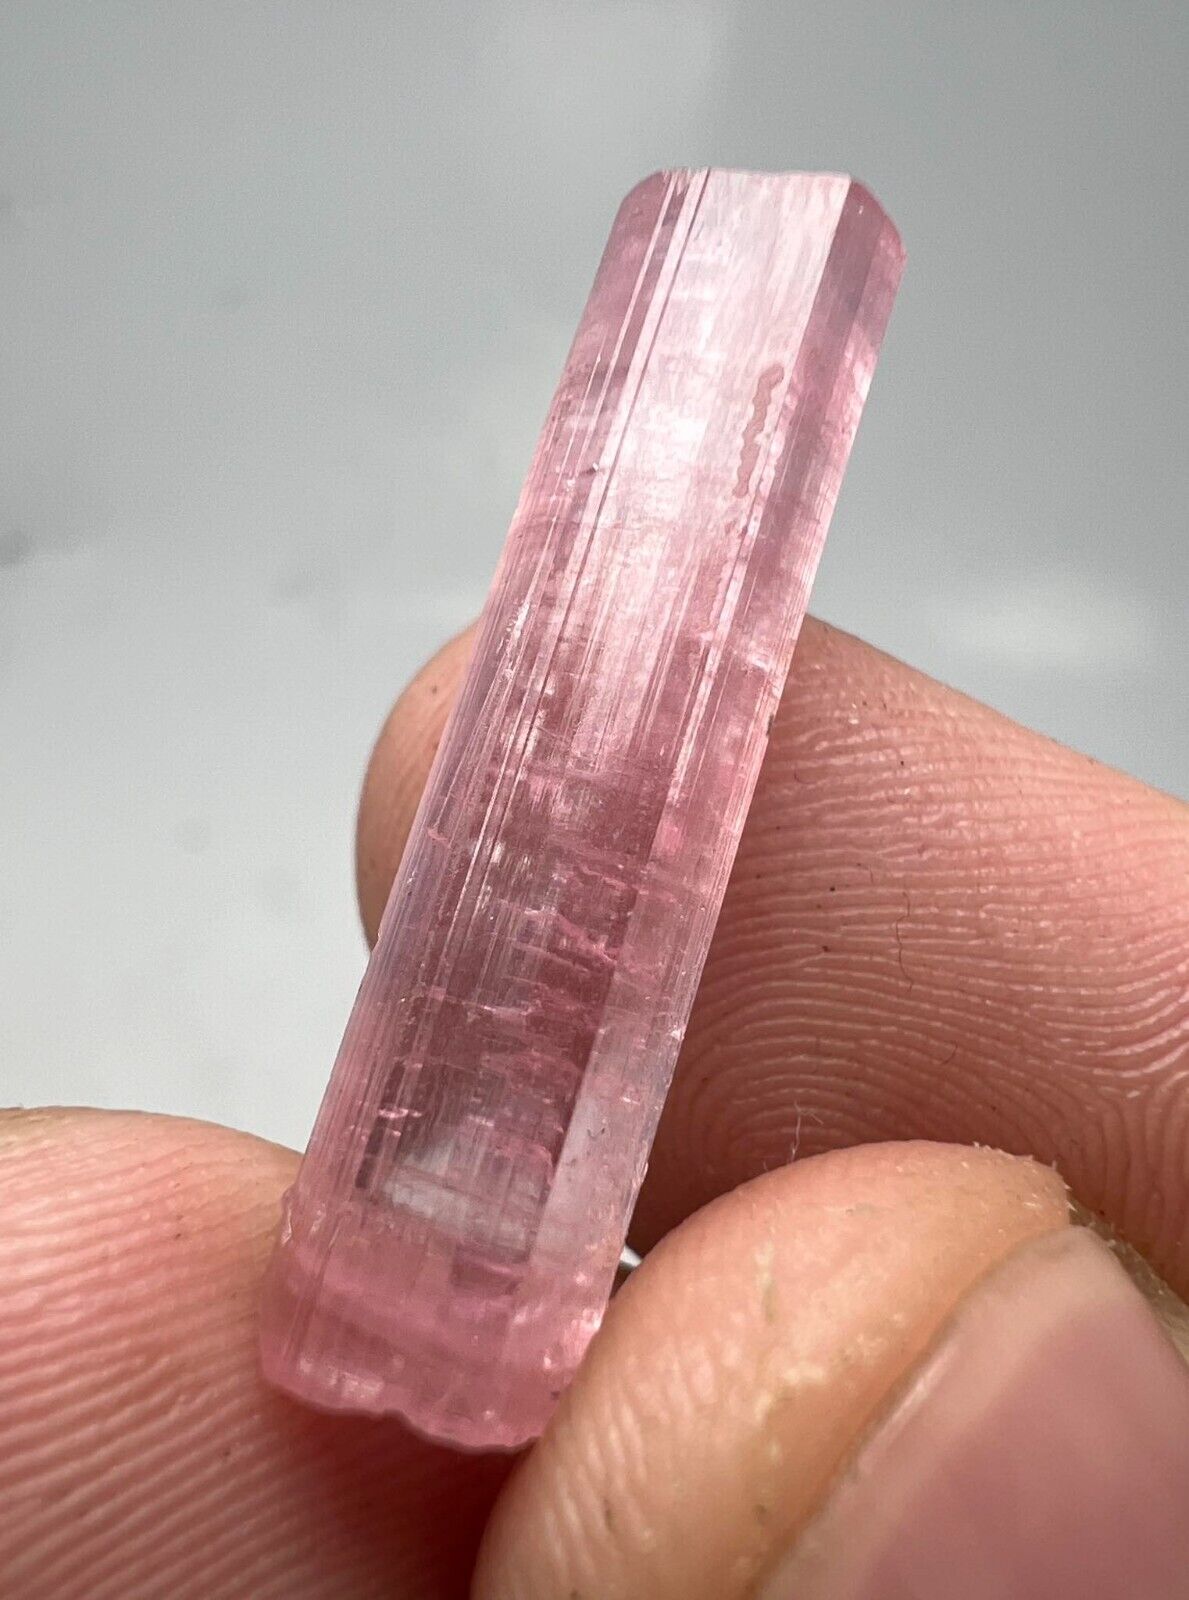 10 Carats Attractive, Beautiful Pink Tourmaline Huge Crystal From Afghanistan